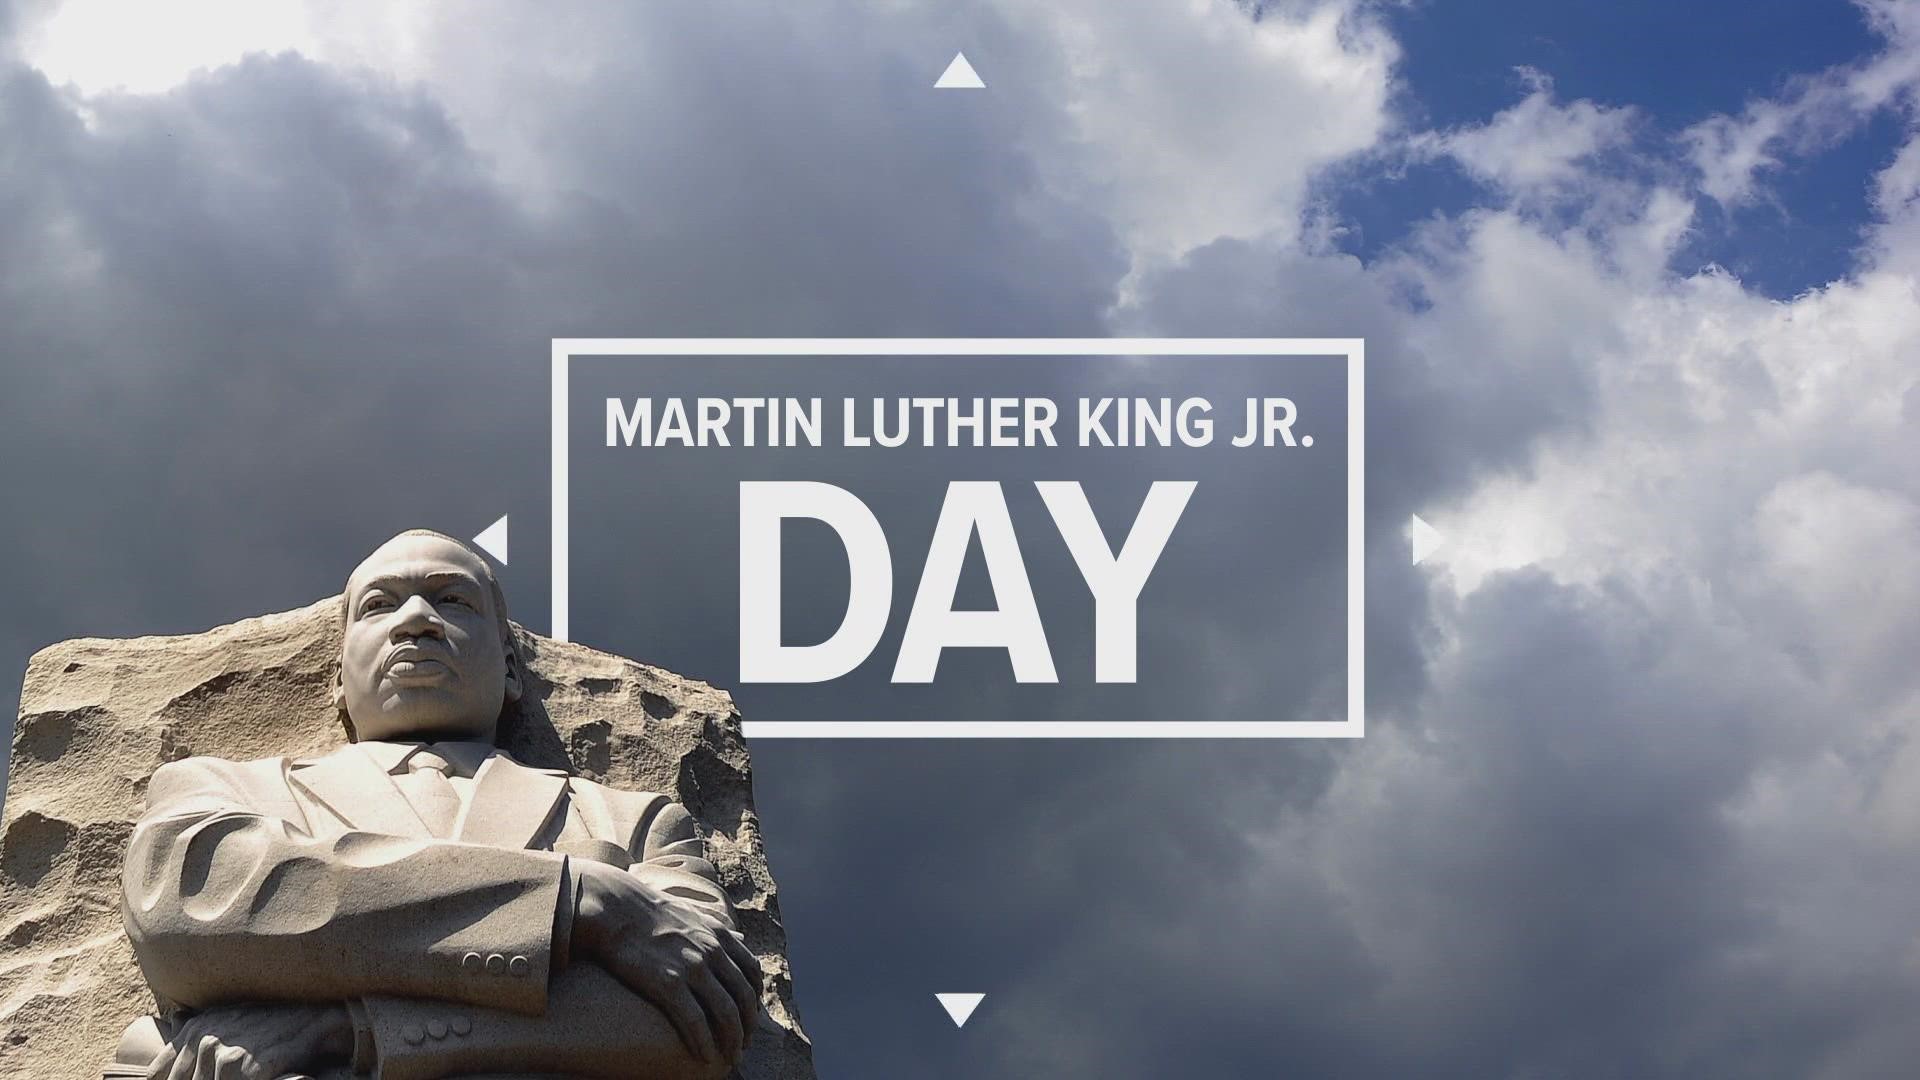 There are lots of ways to celebrate civil rights leader Martin Luther King Jr. in Maine.